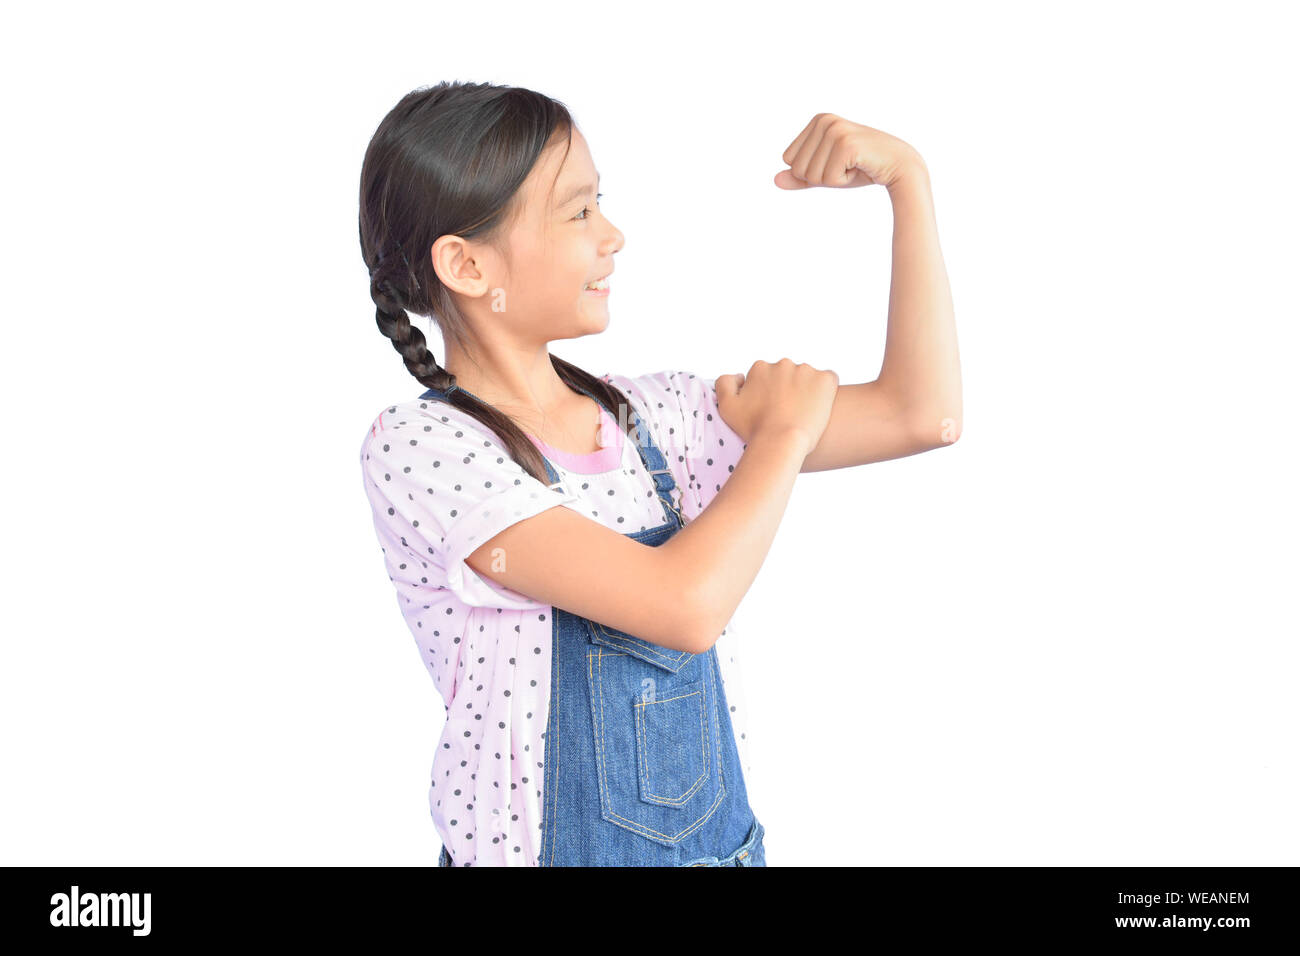 Girl Flexing Muscles While Standing Against White Background Stock Photo